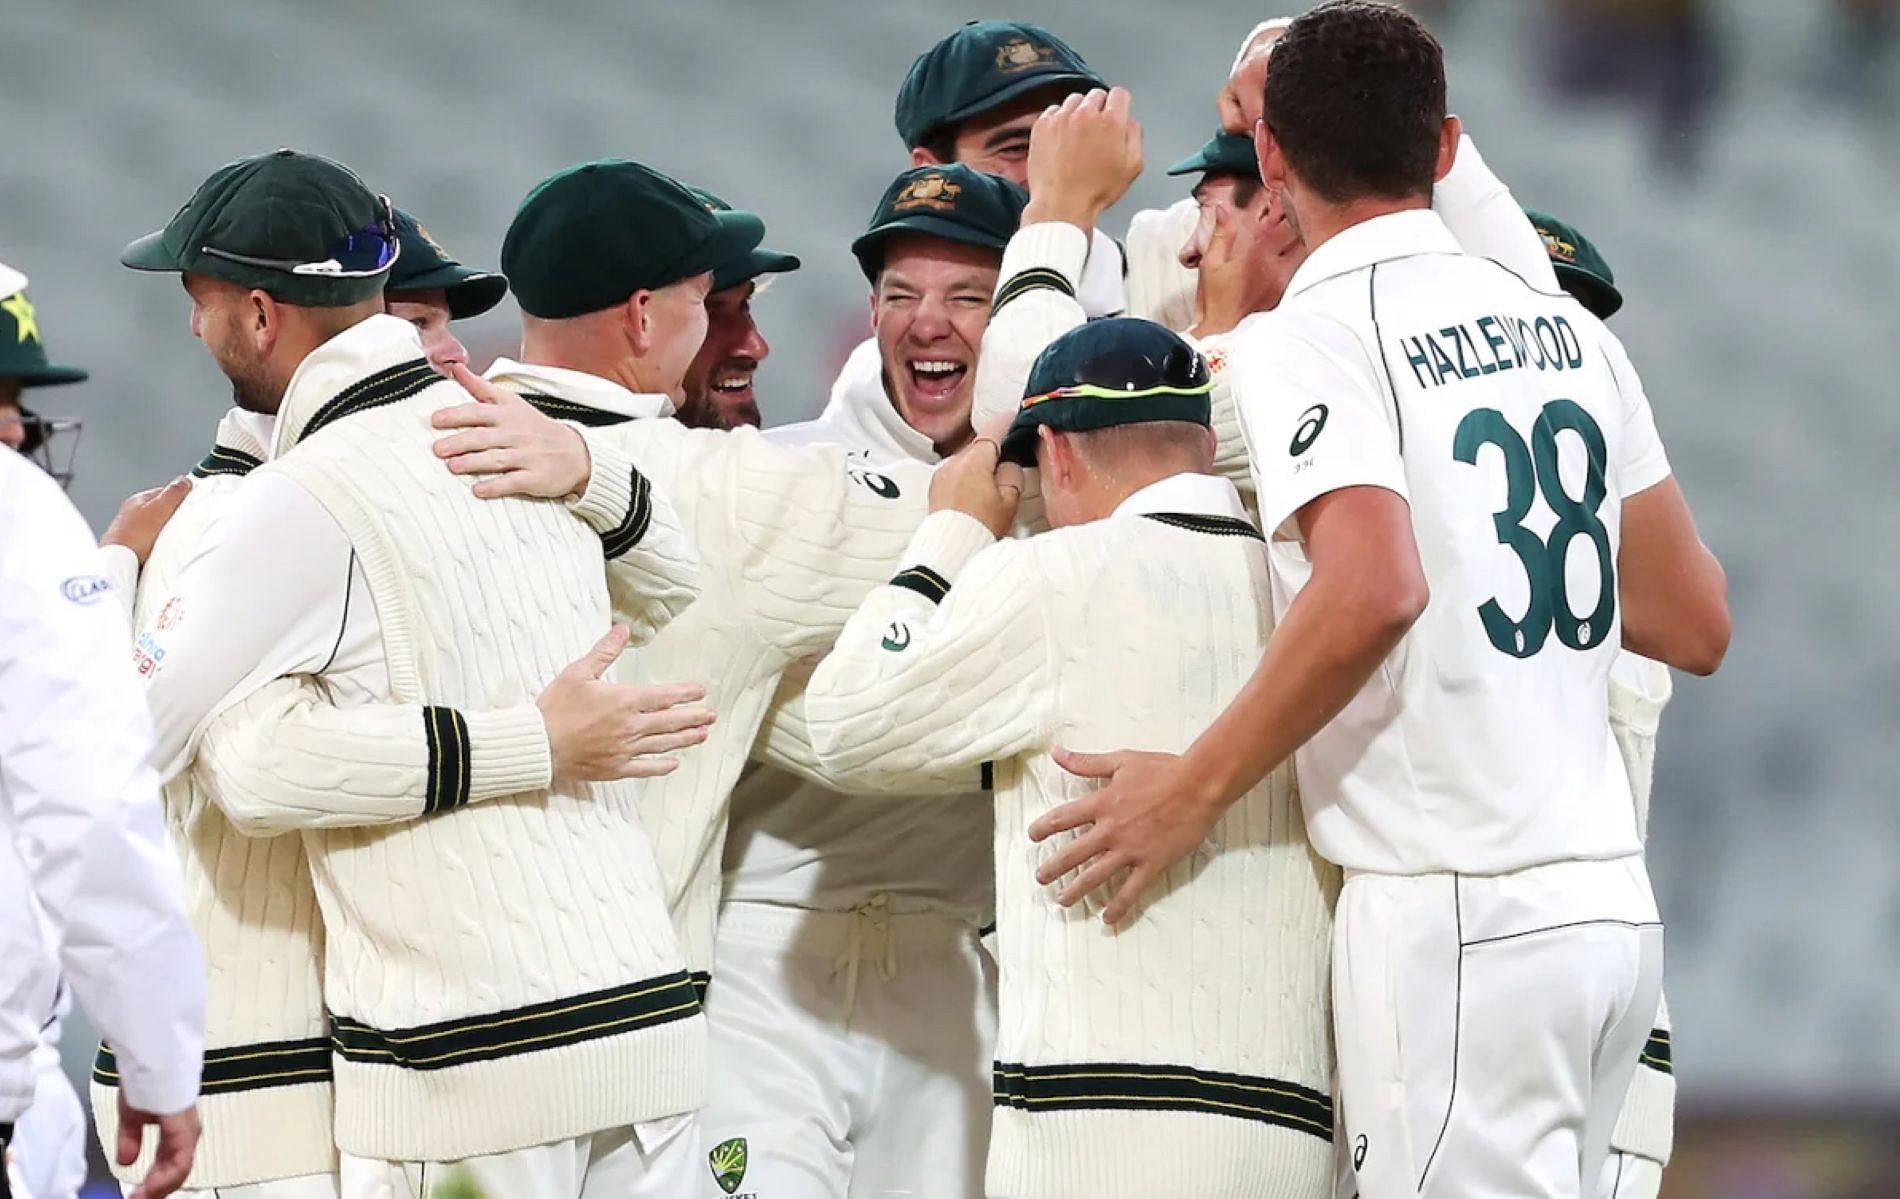 The Australian players were all smiles duirng their demolition of Pakistan.